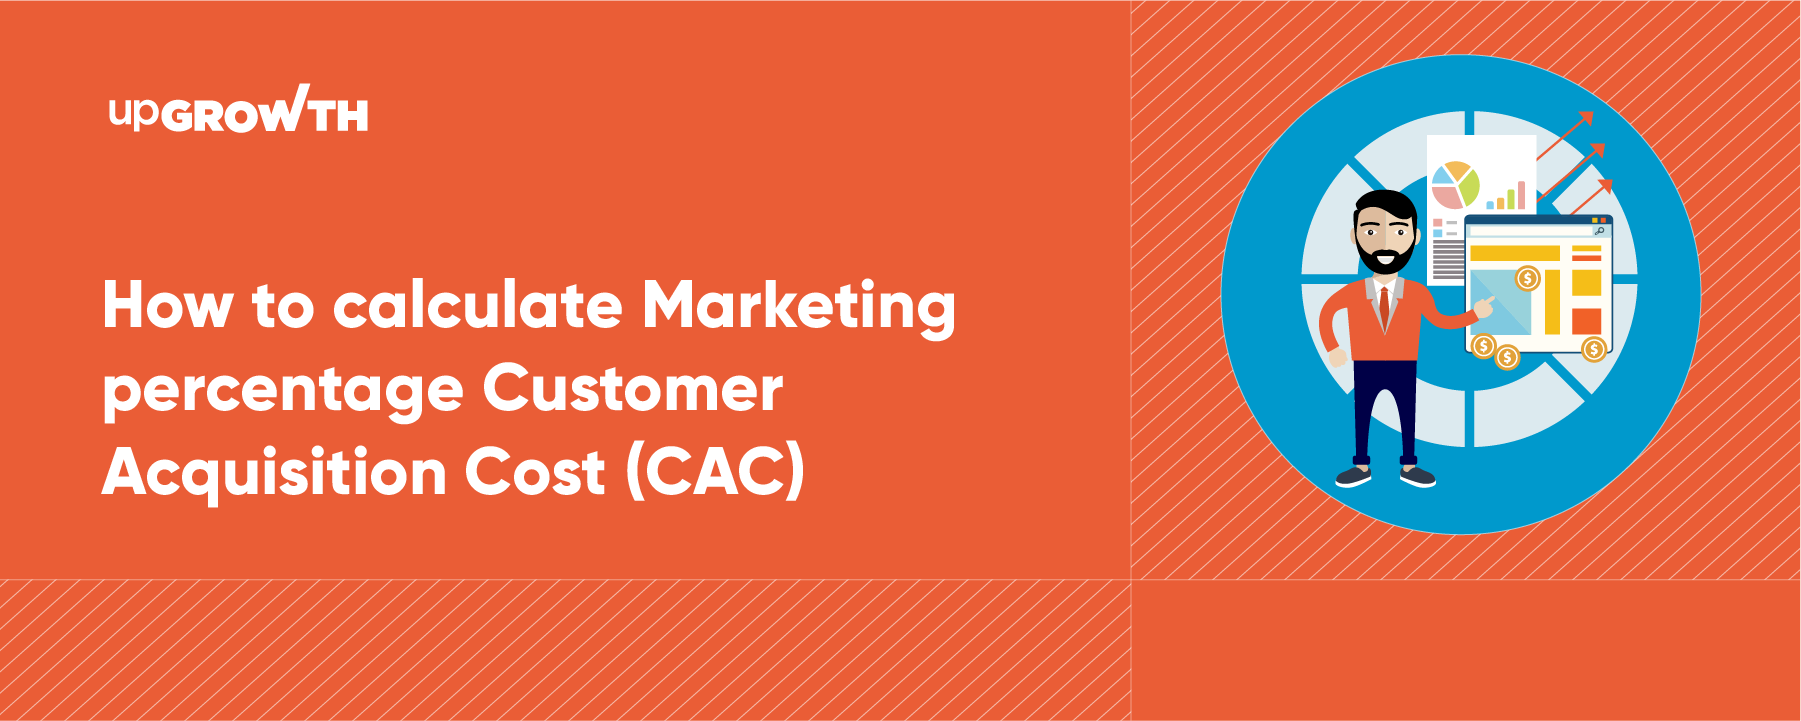 How to calculate Marketing percentage Customer Acquisition Cost